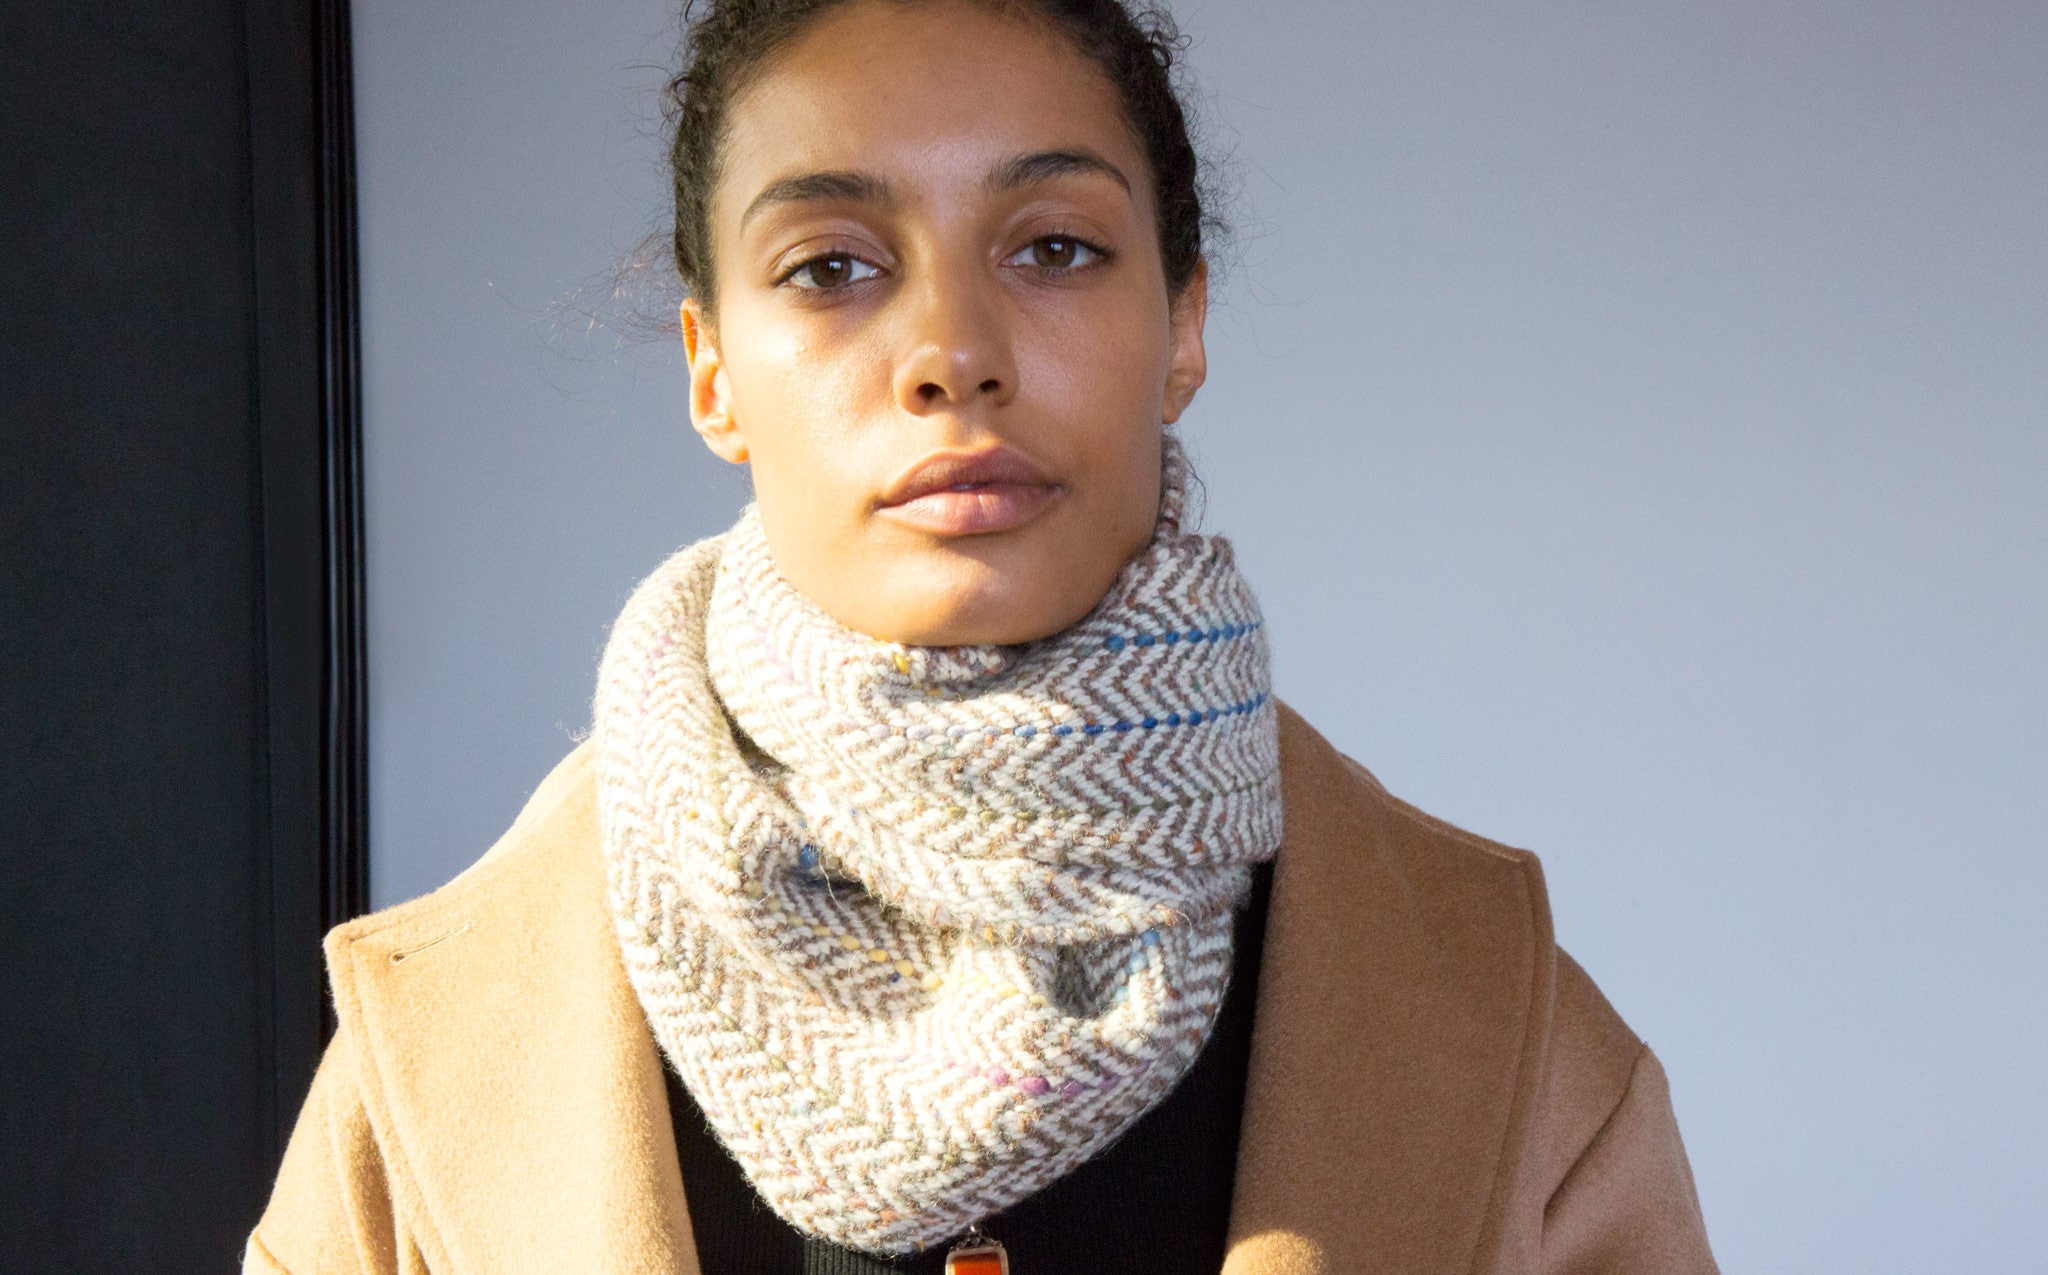 Handwoven Wool Scarf